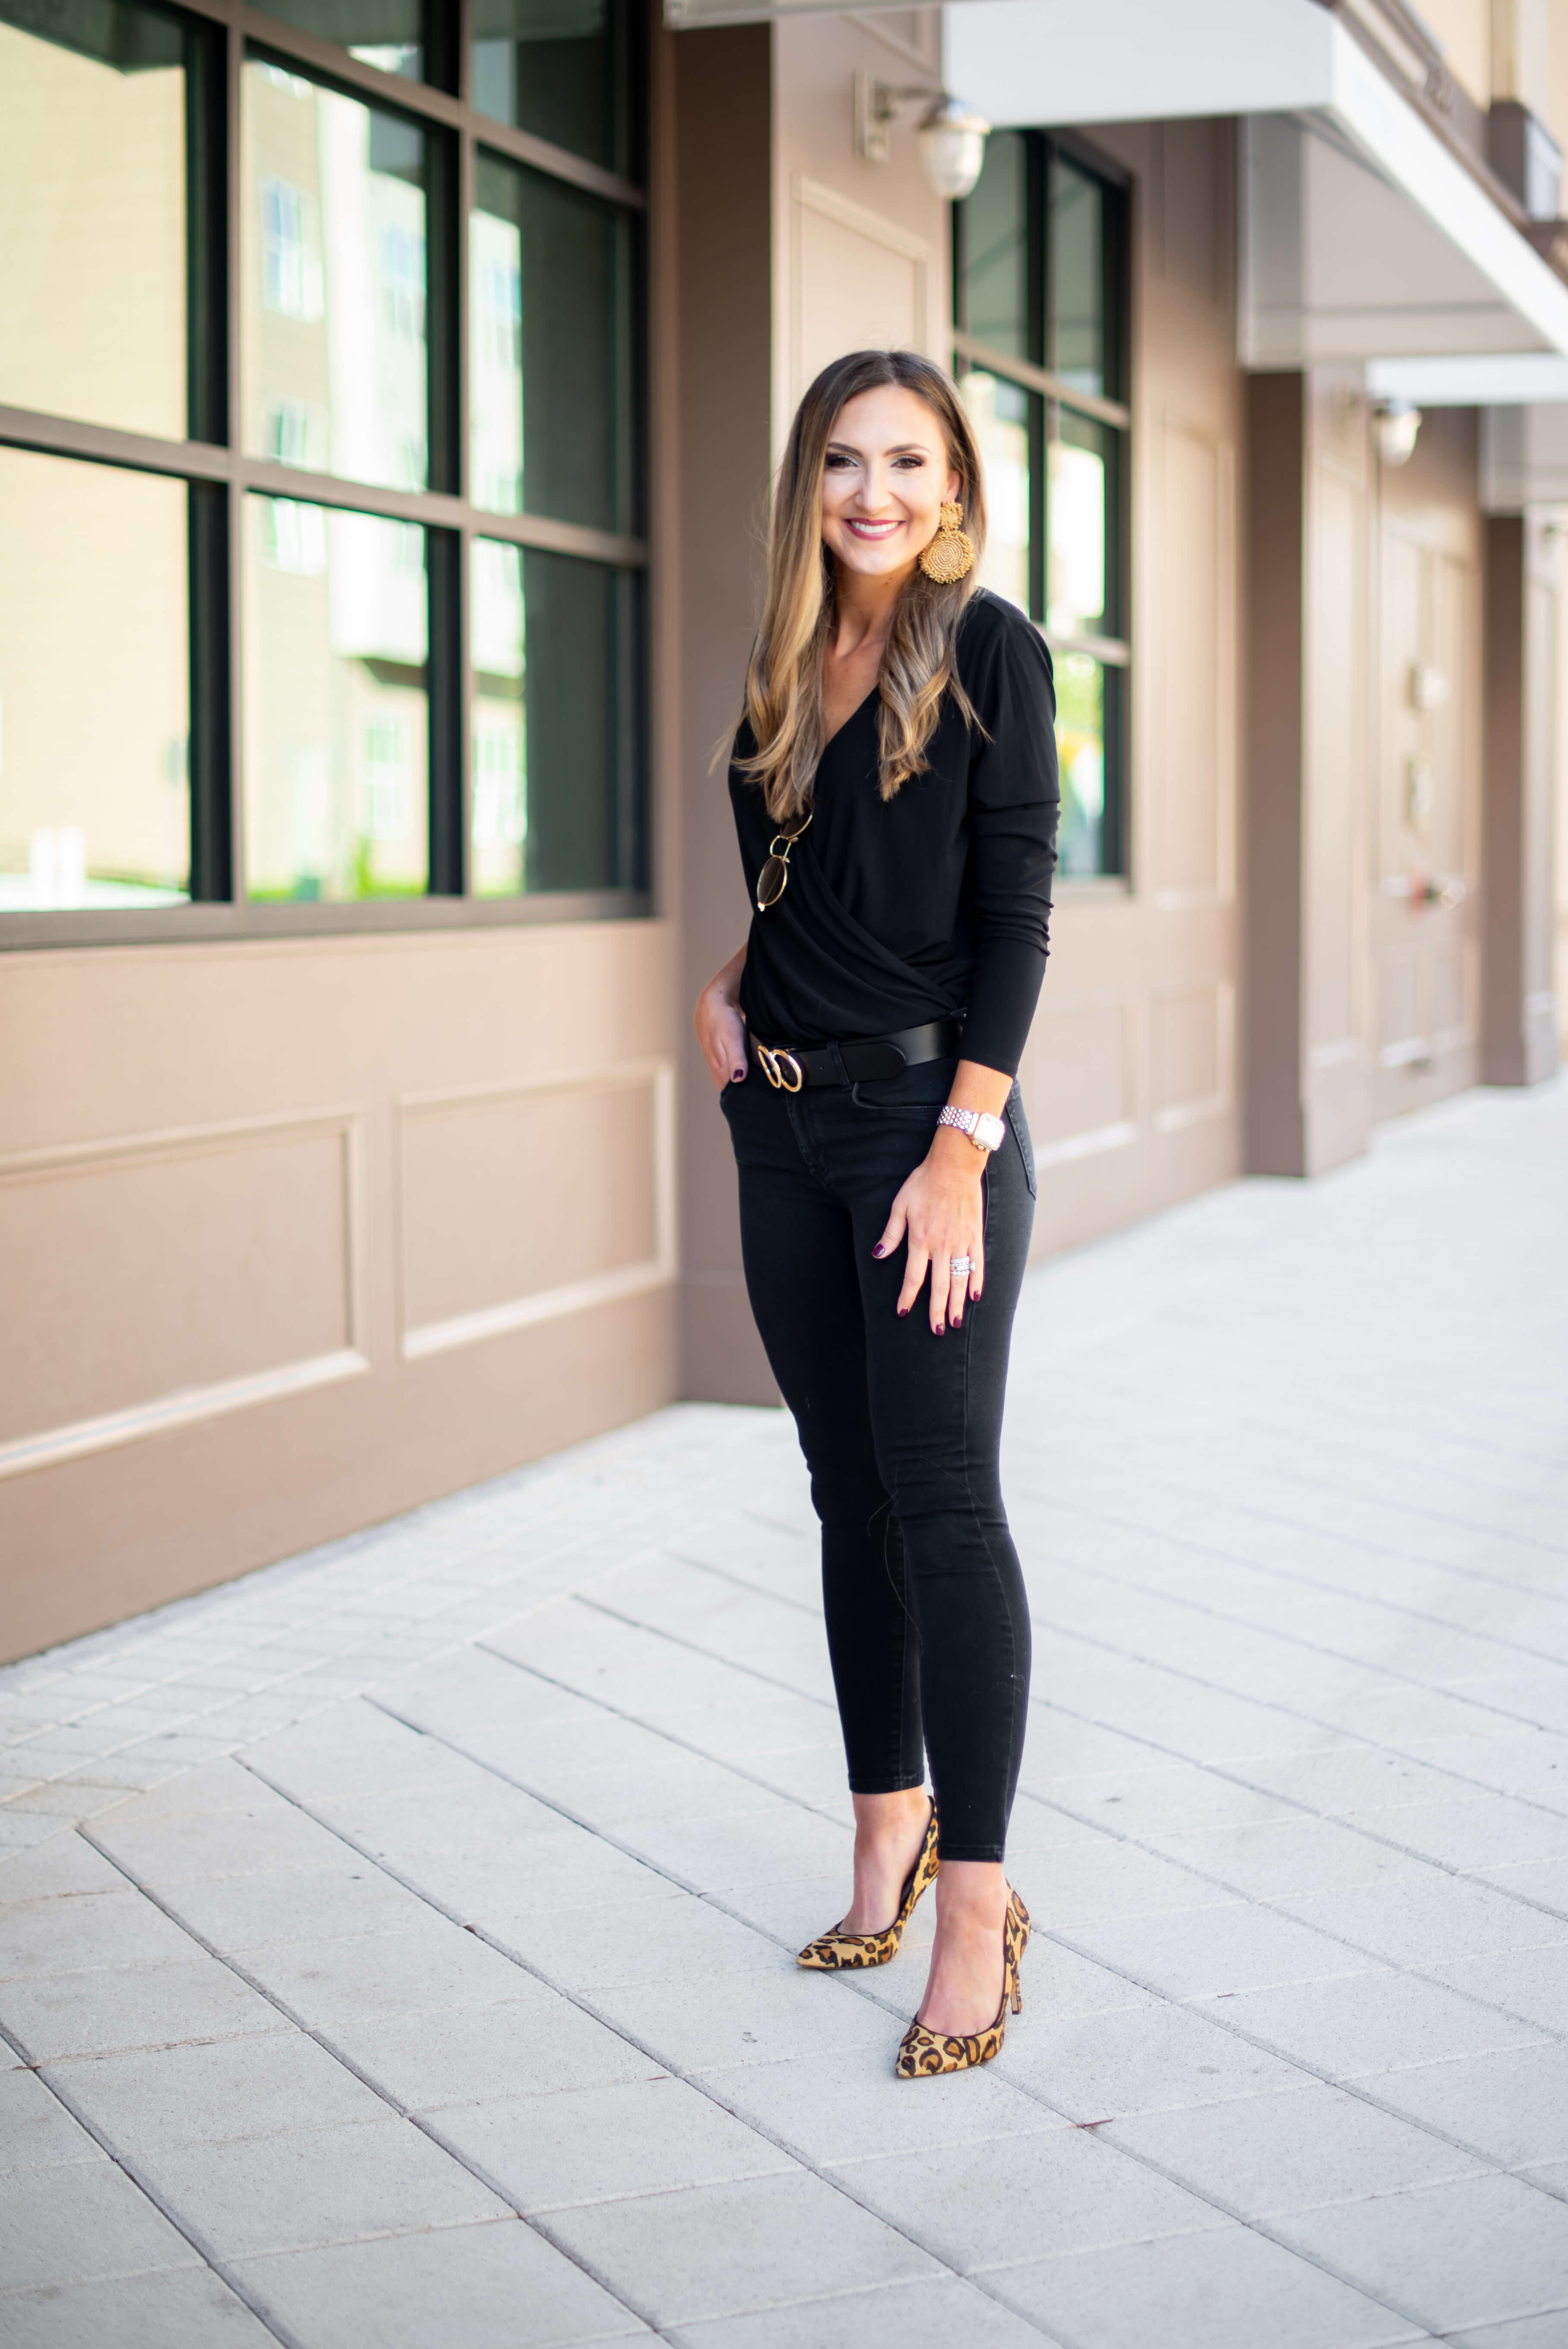 Macy's | How to Dress Up a Long Sleeve Black Bodysuit | 2 Ways featured by top Dallas fashion blog Style Your Senses